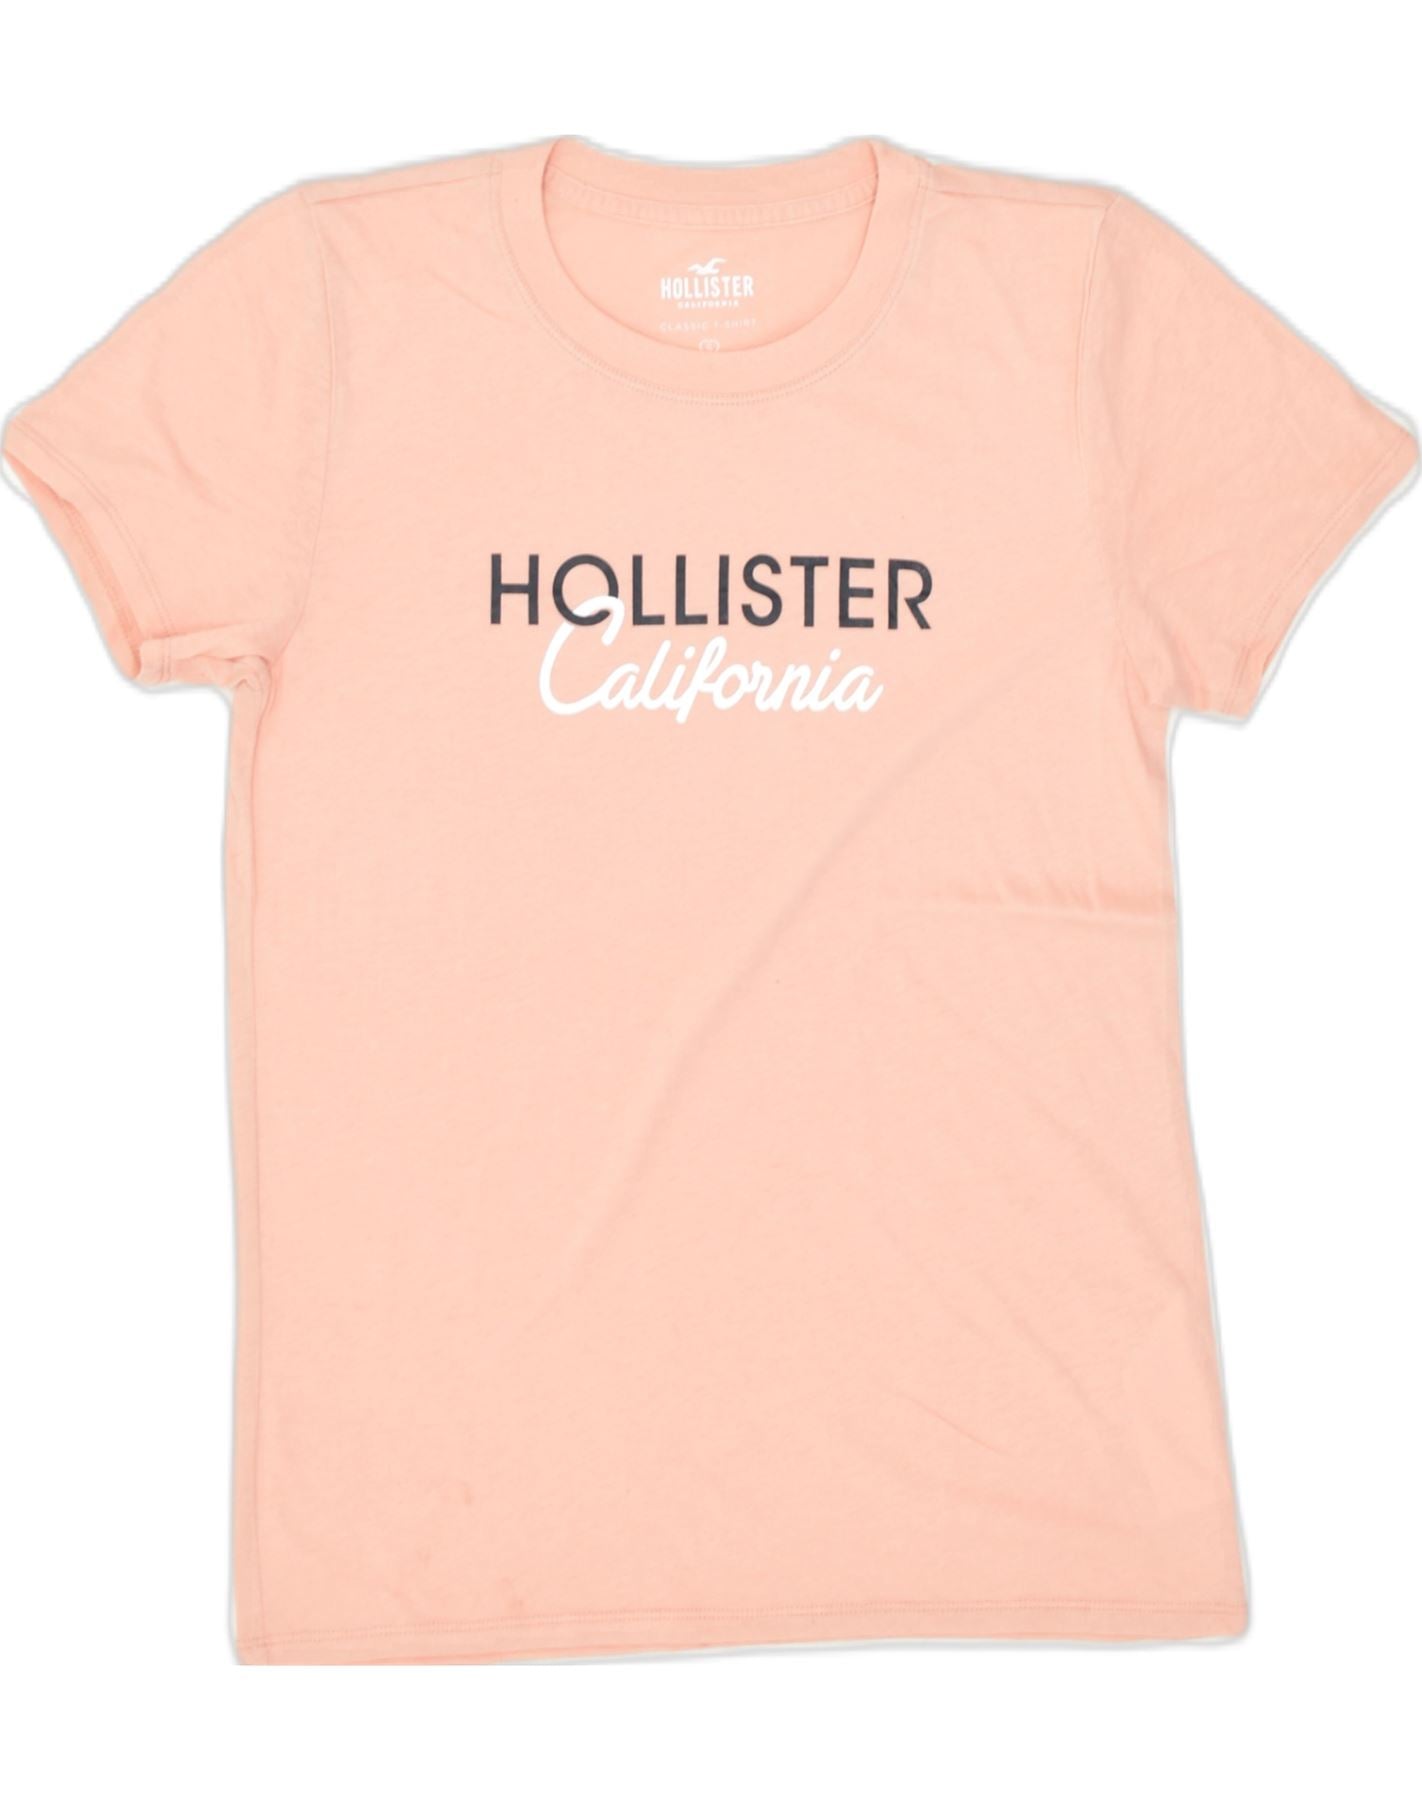 HOLLISTER Womens California Graphic T-Shirt Top UK 10 Small Orange Cotton, Vintage & Second-Hand Clothing Online